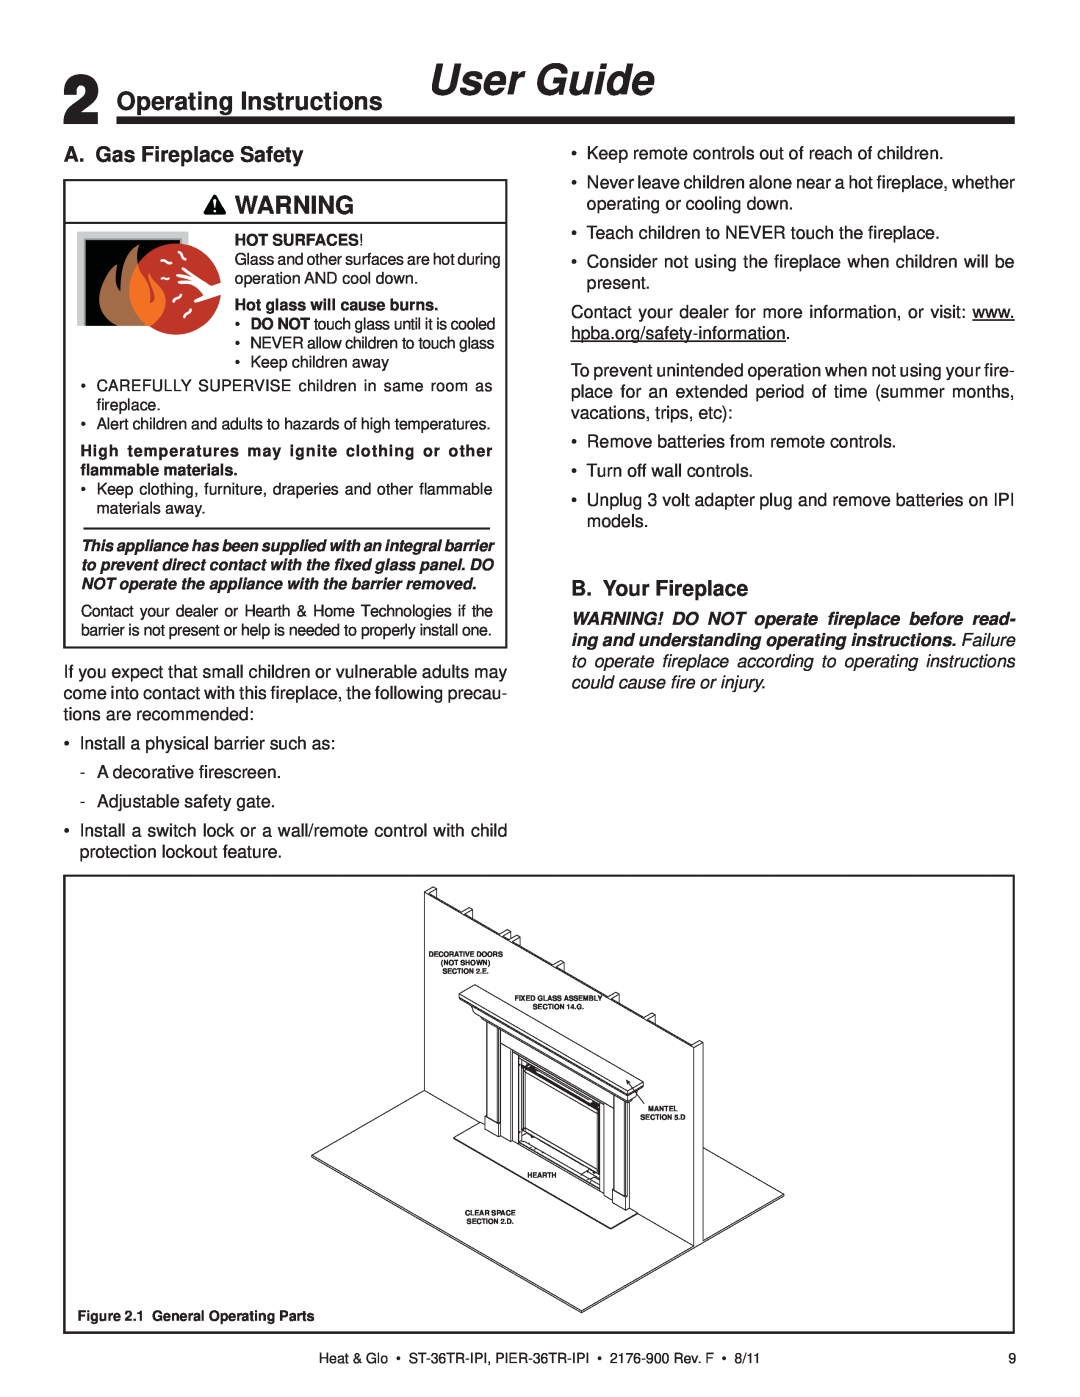 Heat & Glo LifeStyle PIER-36TR-IPI Operating Instructions User Guide, A. Gas Fireplace Safety, B. Your Fireplace 